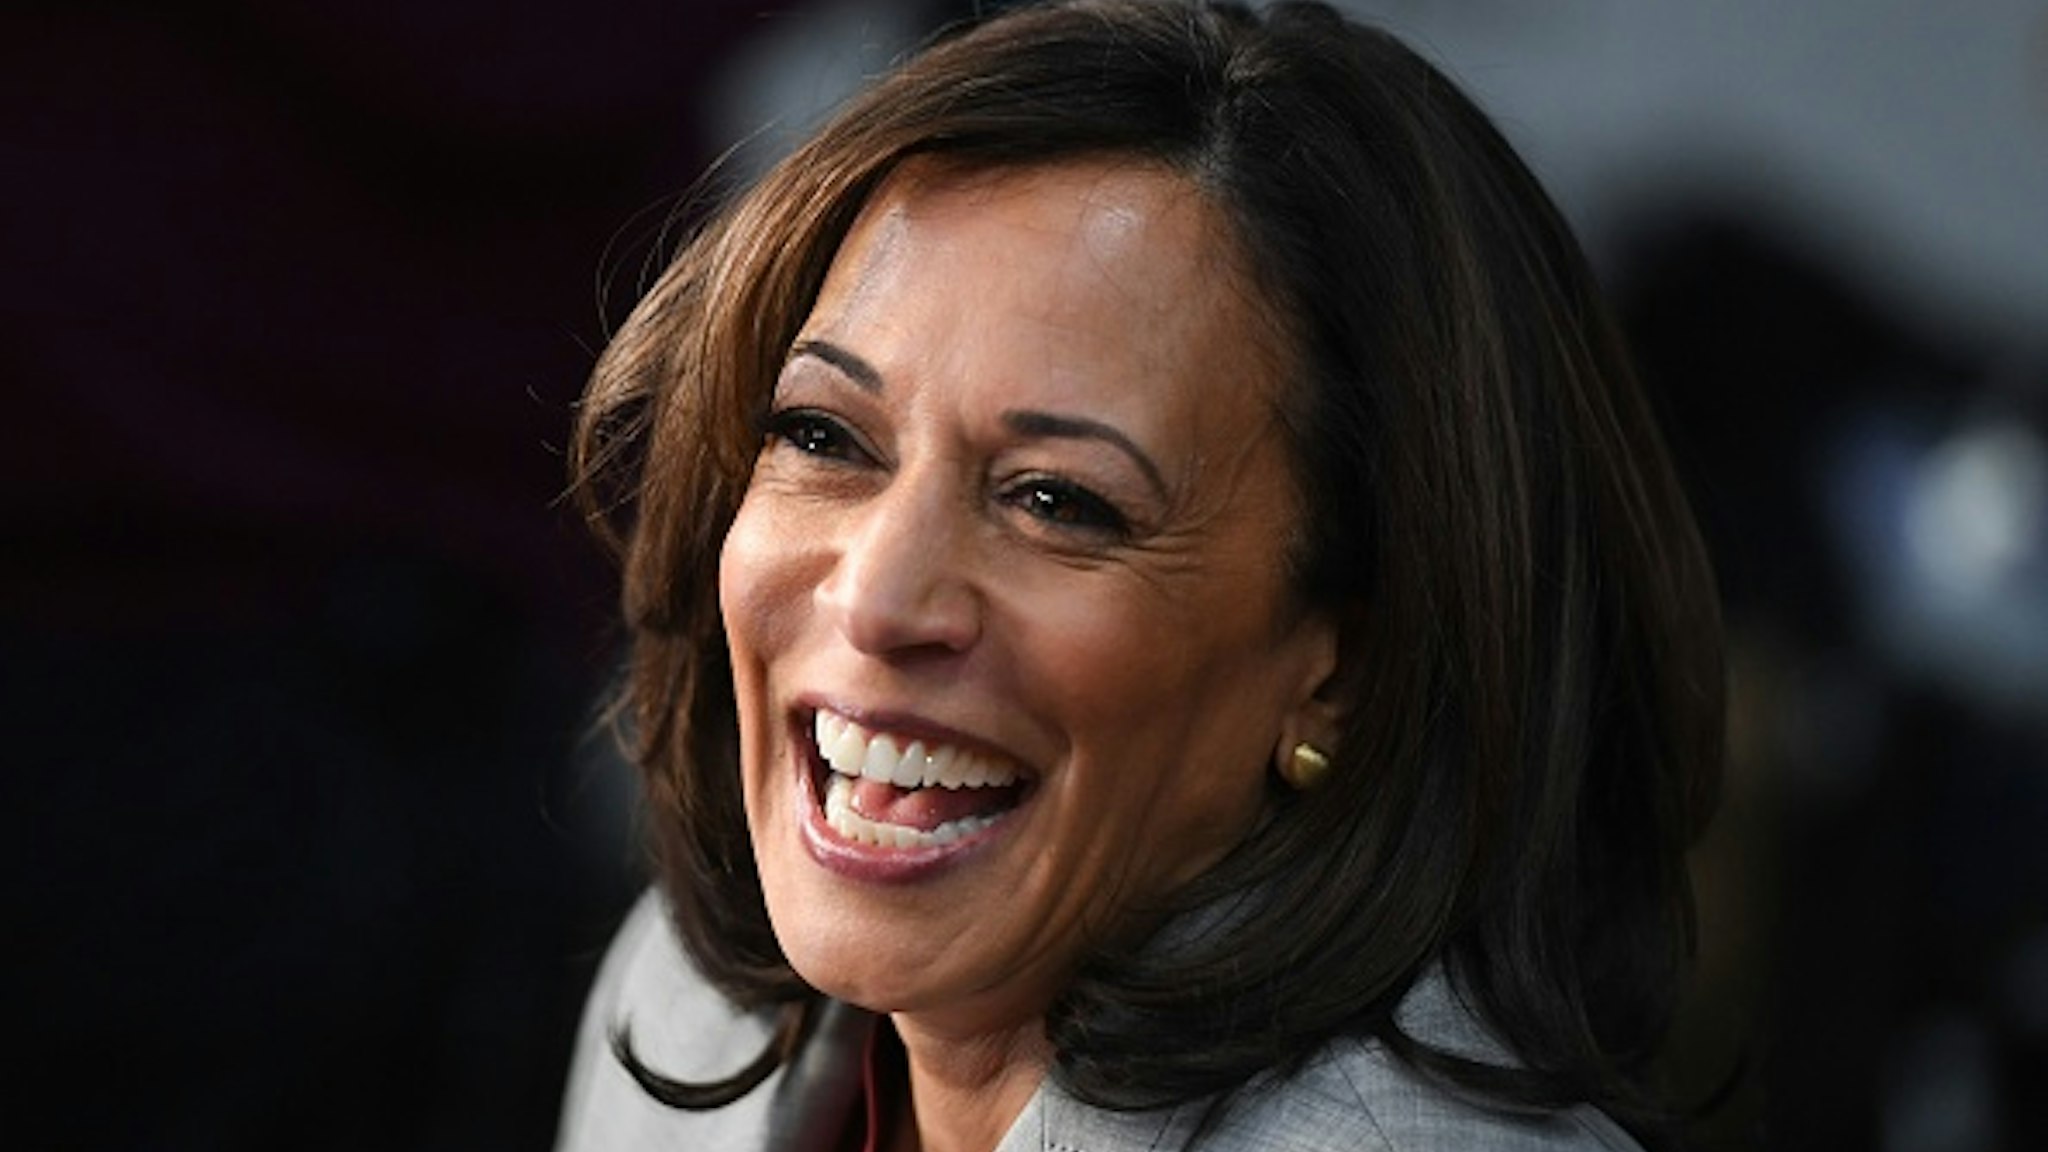 Democratic presidential hopeful California Senator Kamala Harris speaks to the press in the Spin Room after participating in the fifth Democratic primary debate of the 2020 presidential campaign season co-hosted by MSNBC and The Washington Post at Tyler Perry Studios in Atlanta, Georgia on November 20, 2019.